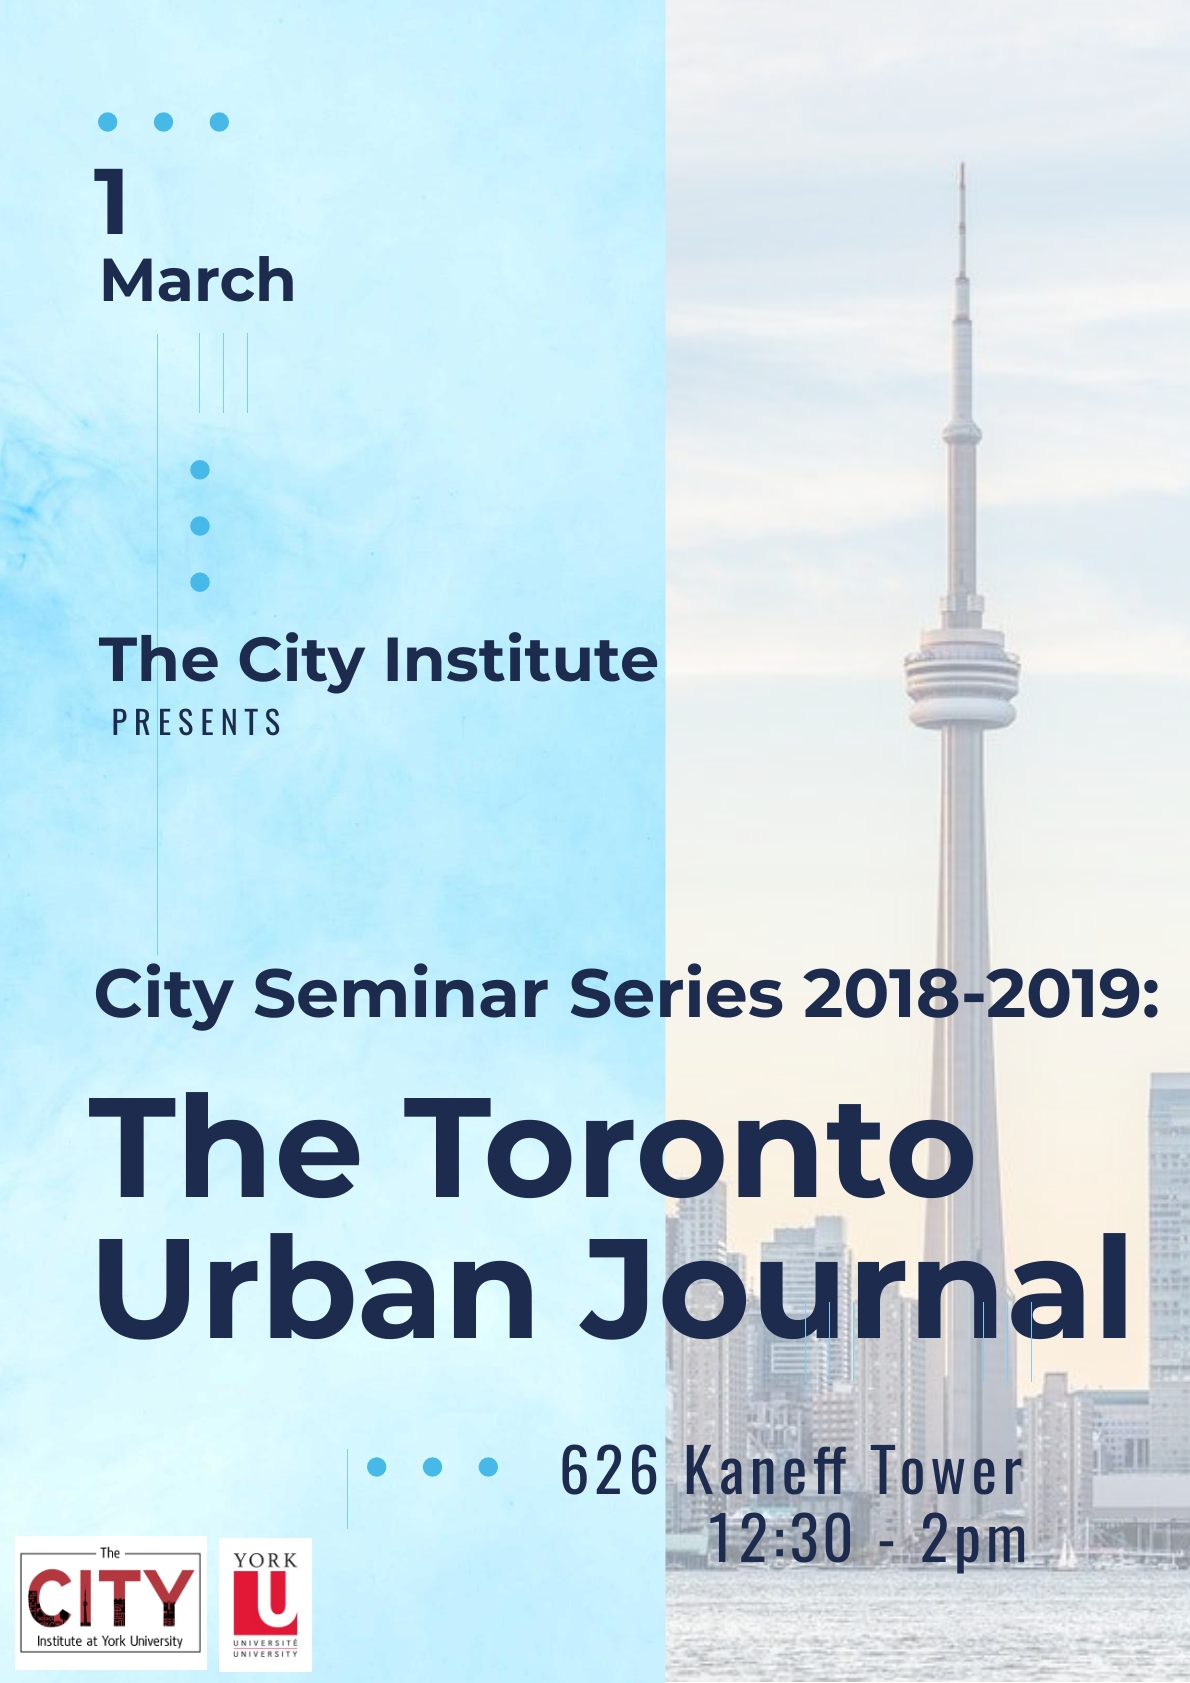 Background of the CN Tower with the left side of the poster overlaid with a light blue block that includes date, time and venue details.